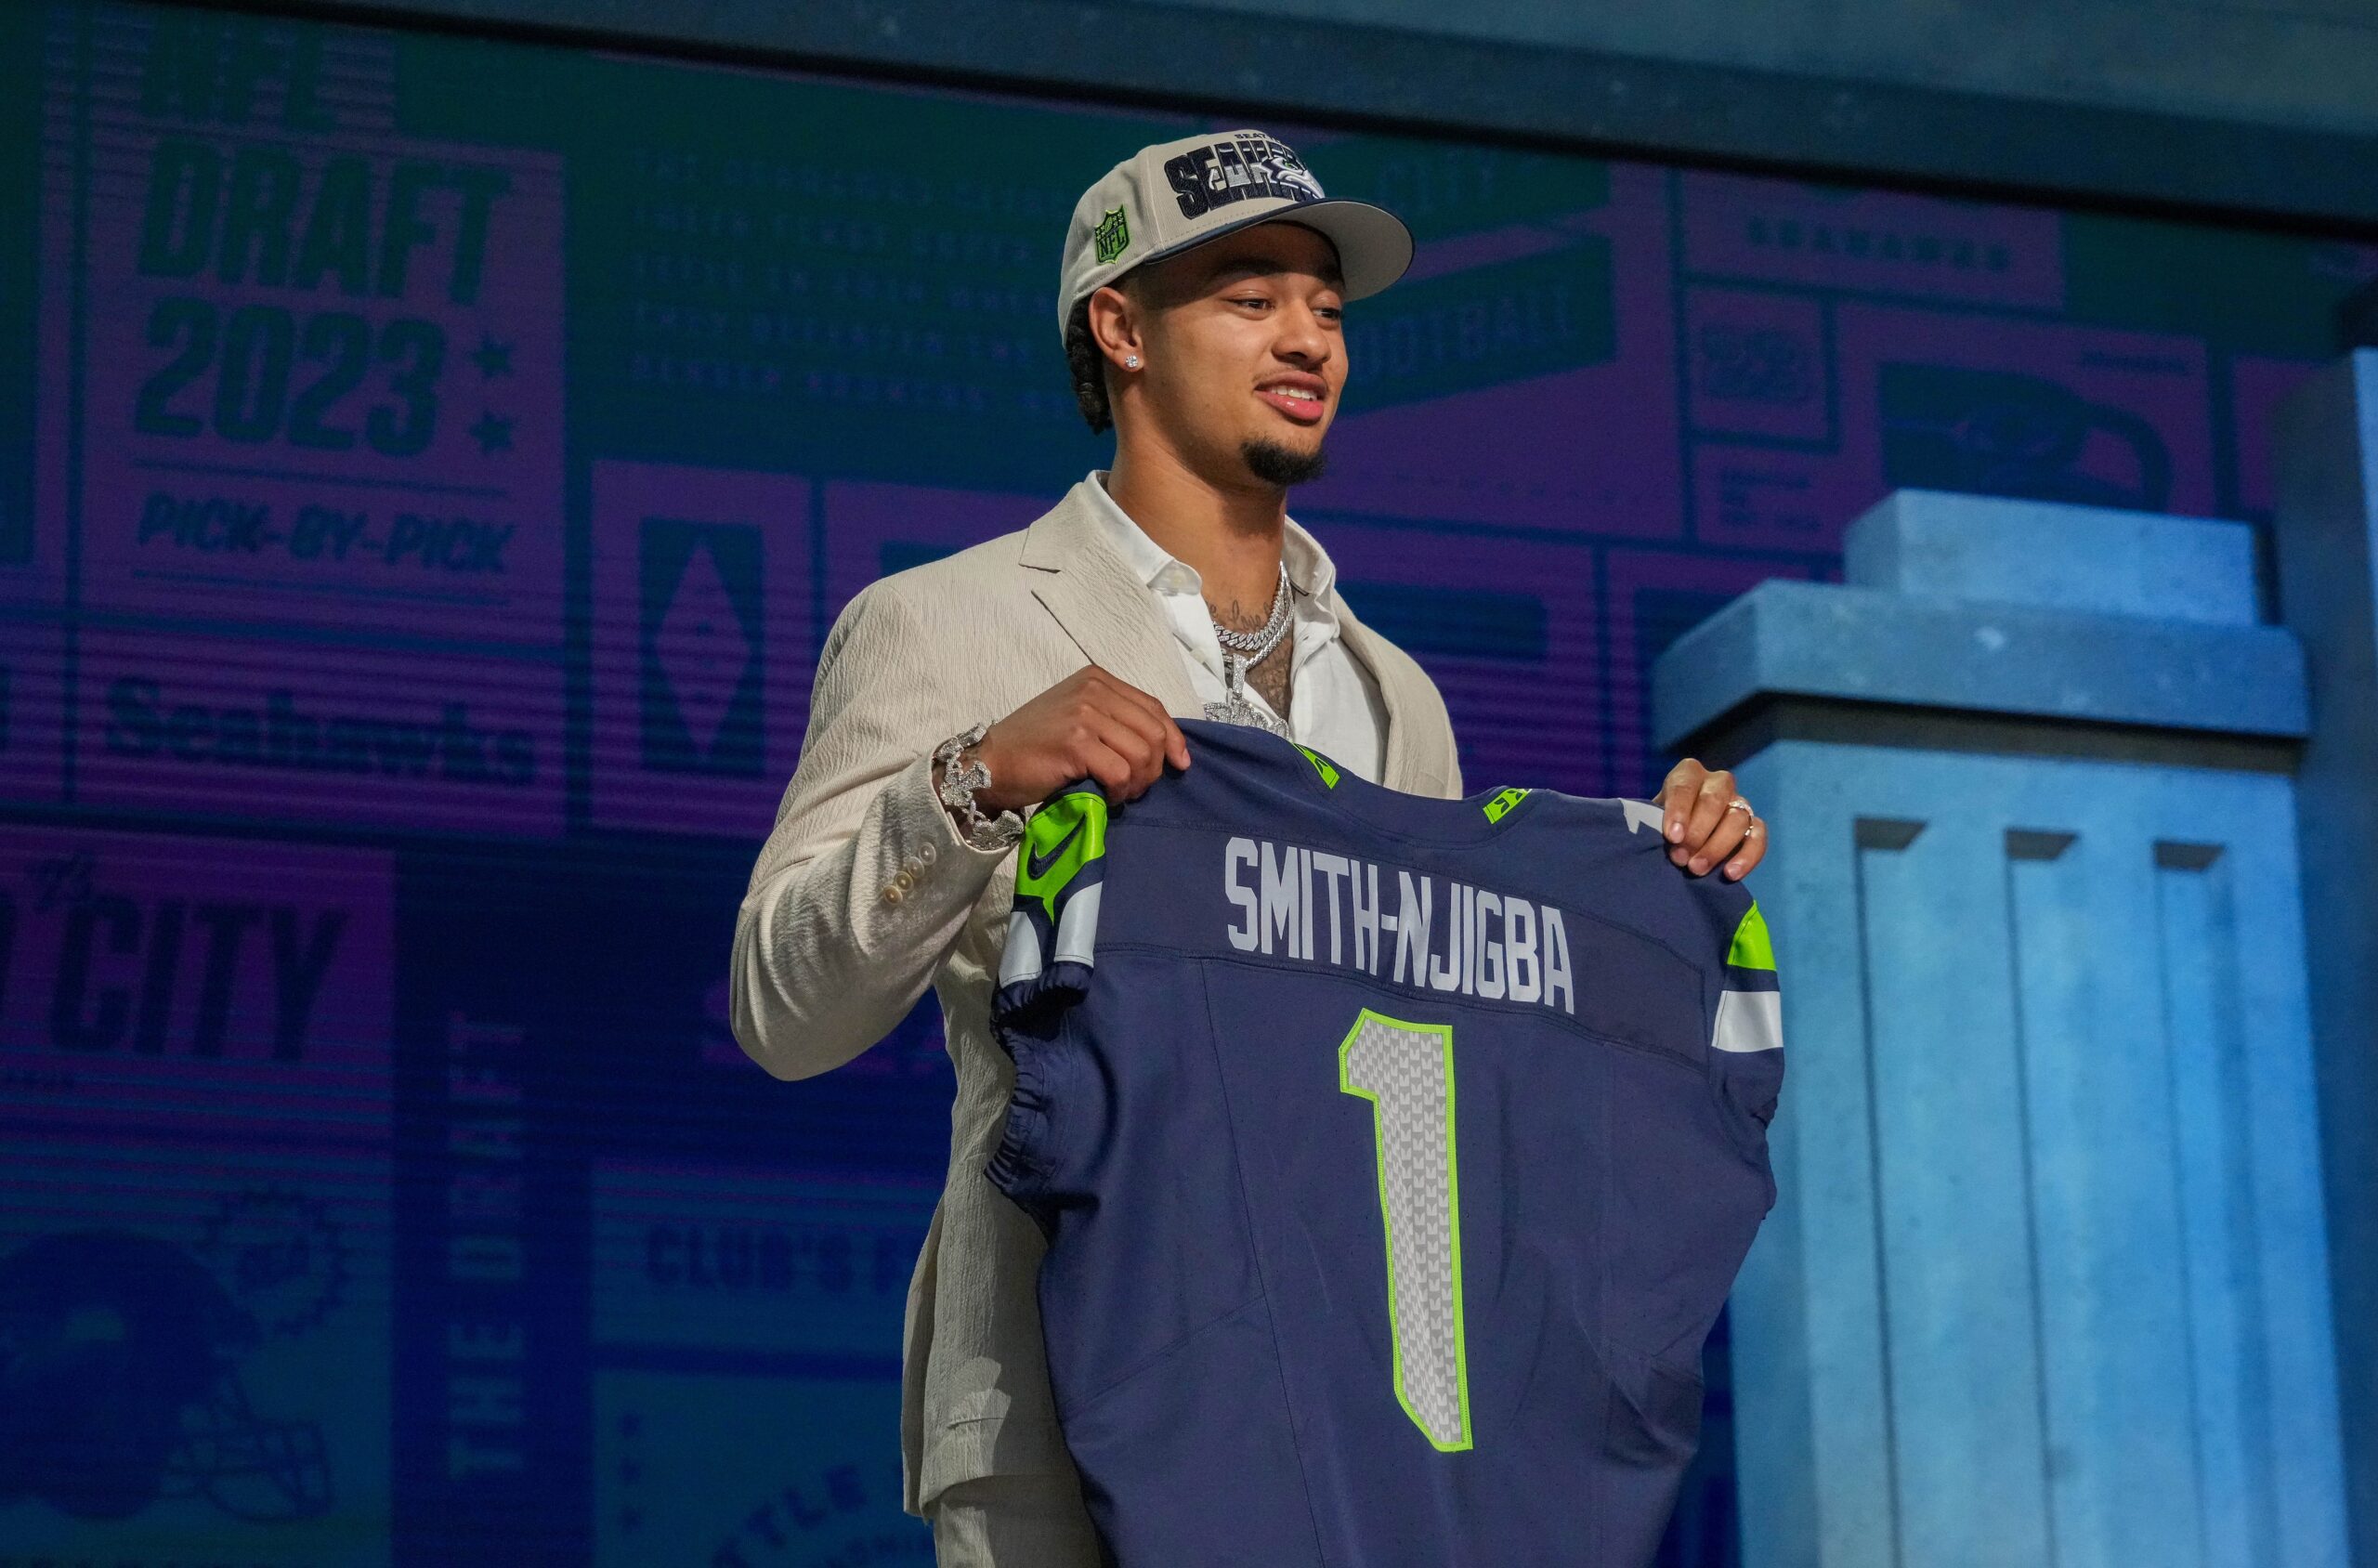 Ohio State wide receiver Jaxon Smith-Njigba on stage after being selected by the Seattle Seahawks twentieth overall.